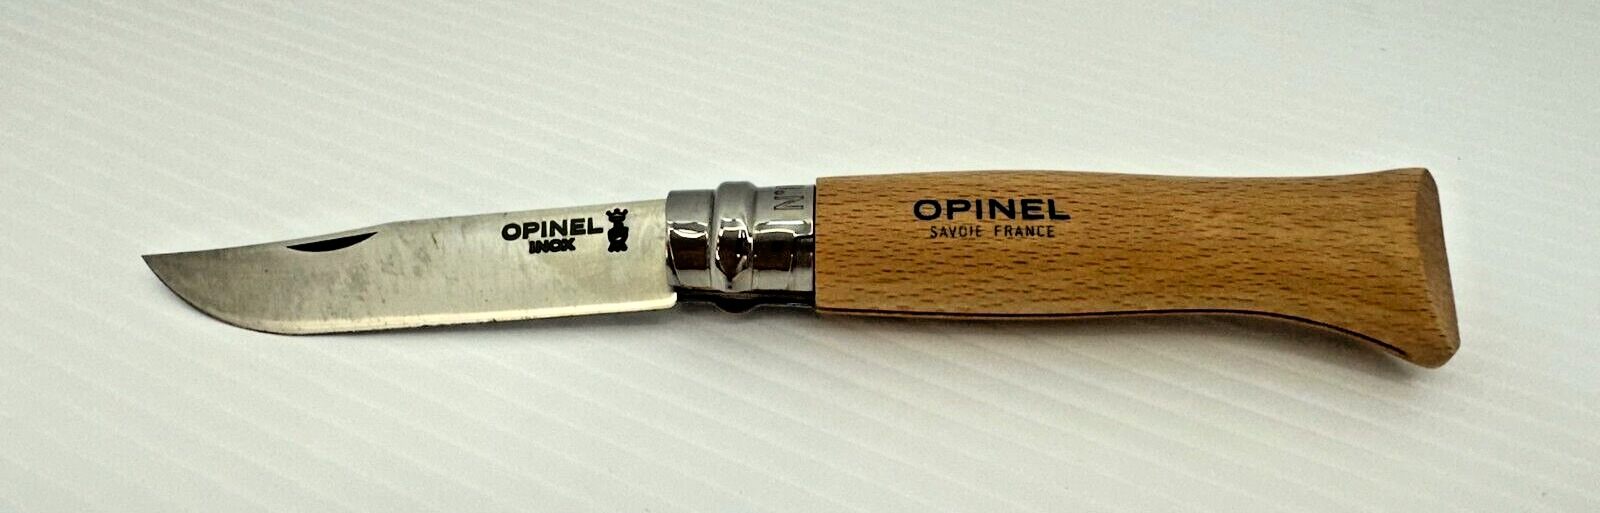 Opinel No. 8 French Folding Knife Wood Handle Stainless Steal Blade Pocket Knife